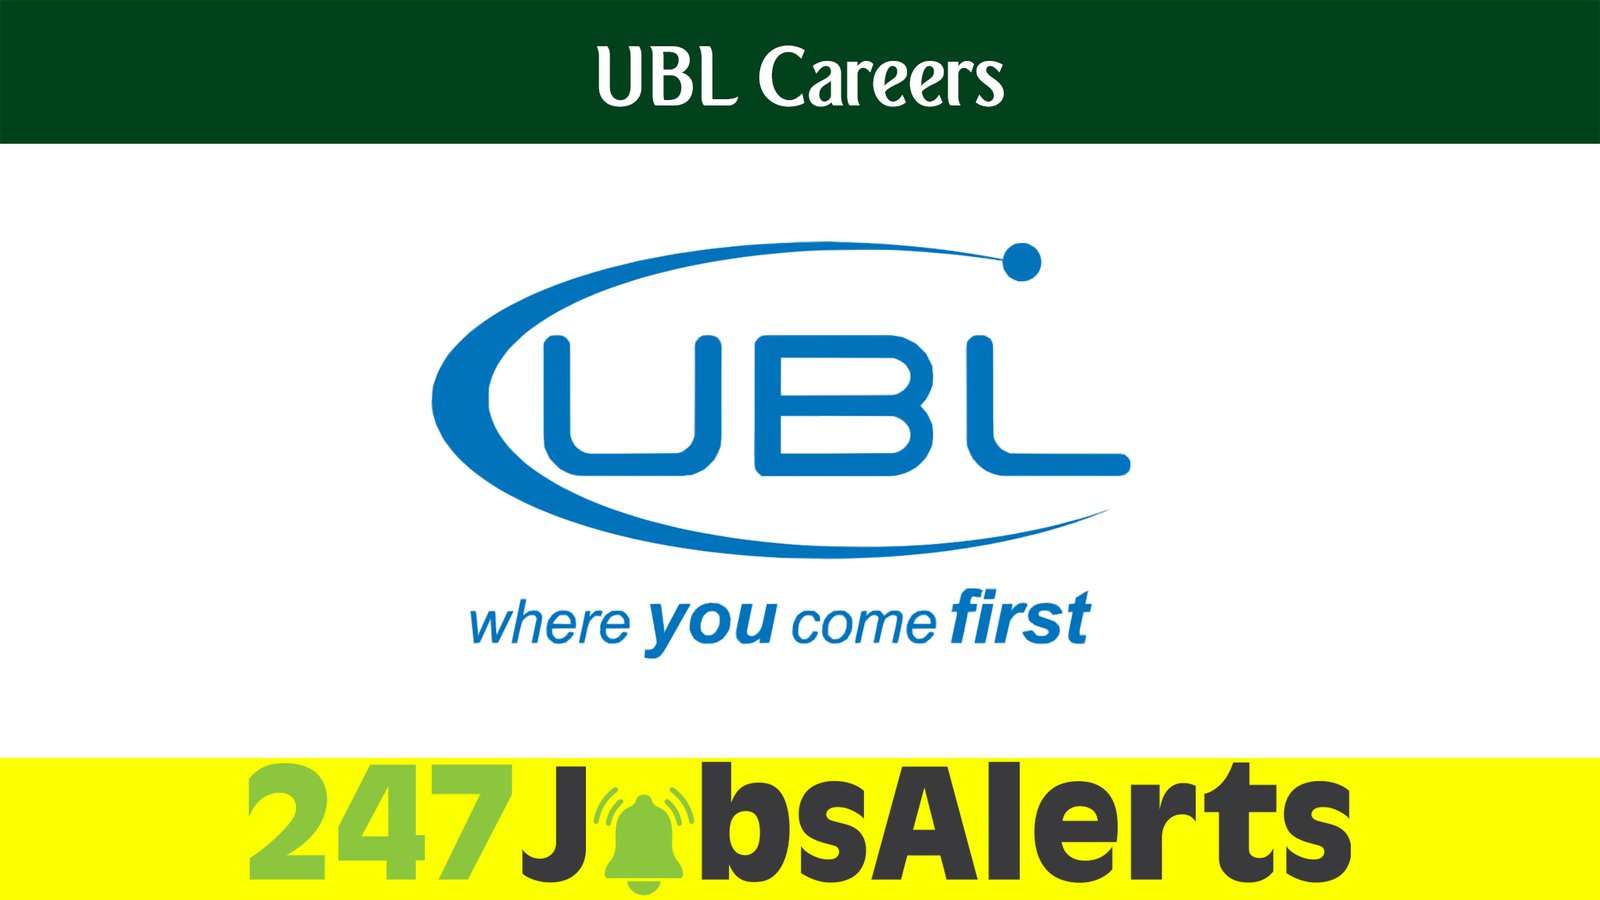 UBL Careers